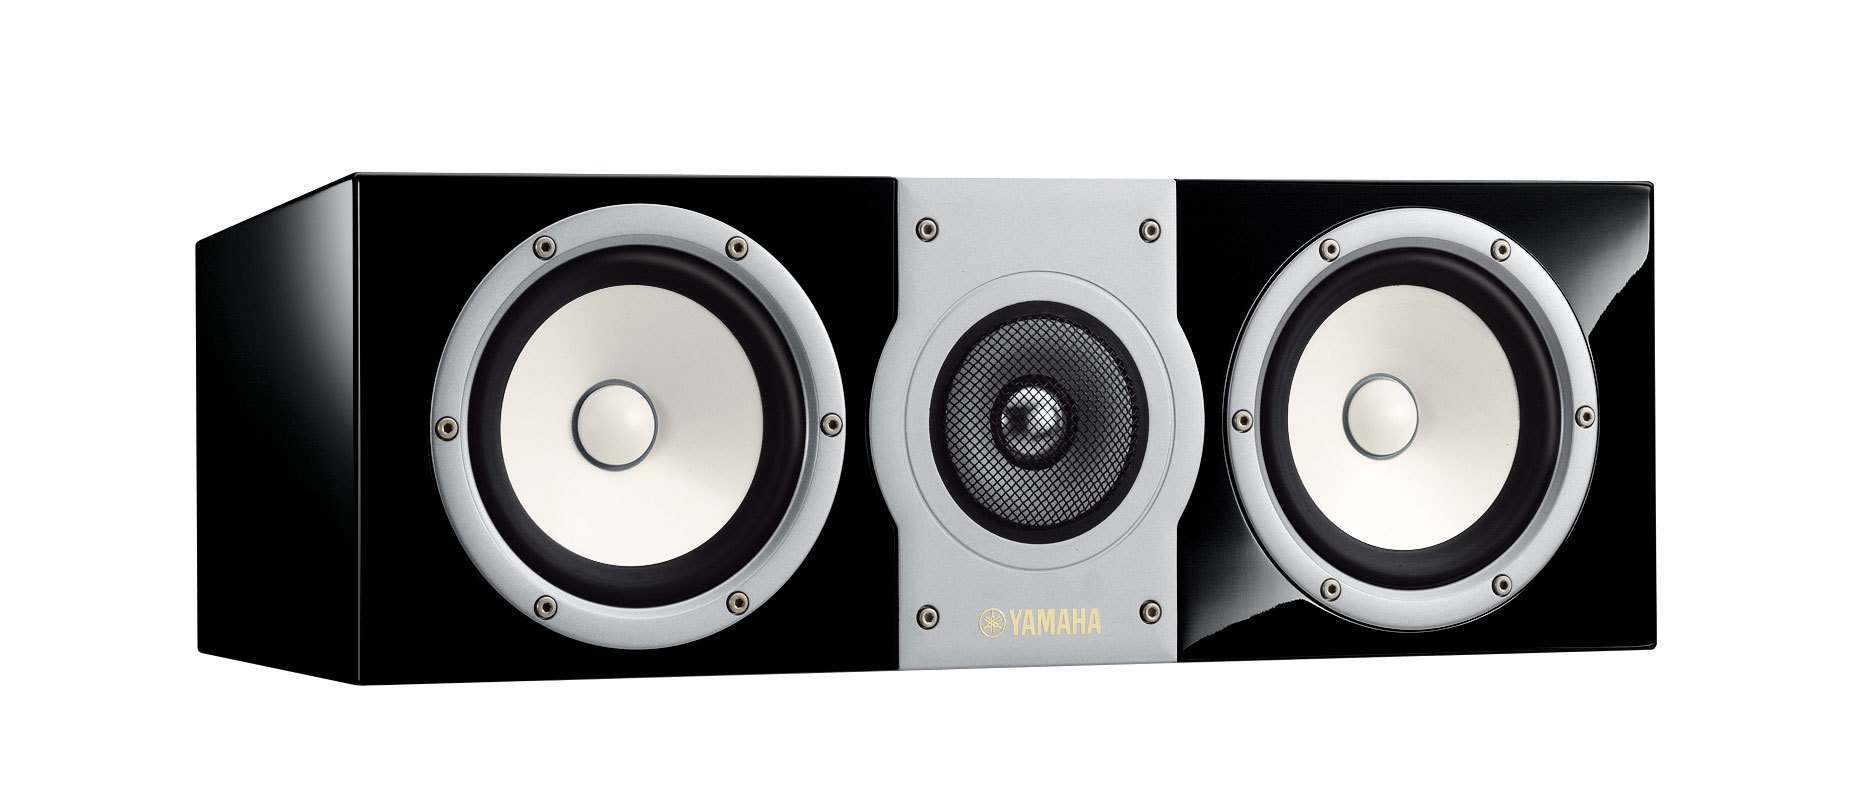 NS-F901 - Overview - Speakers - Audio & Visual - Products - Yamaha USA